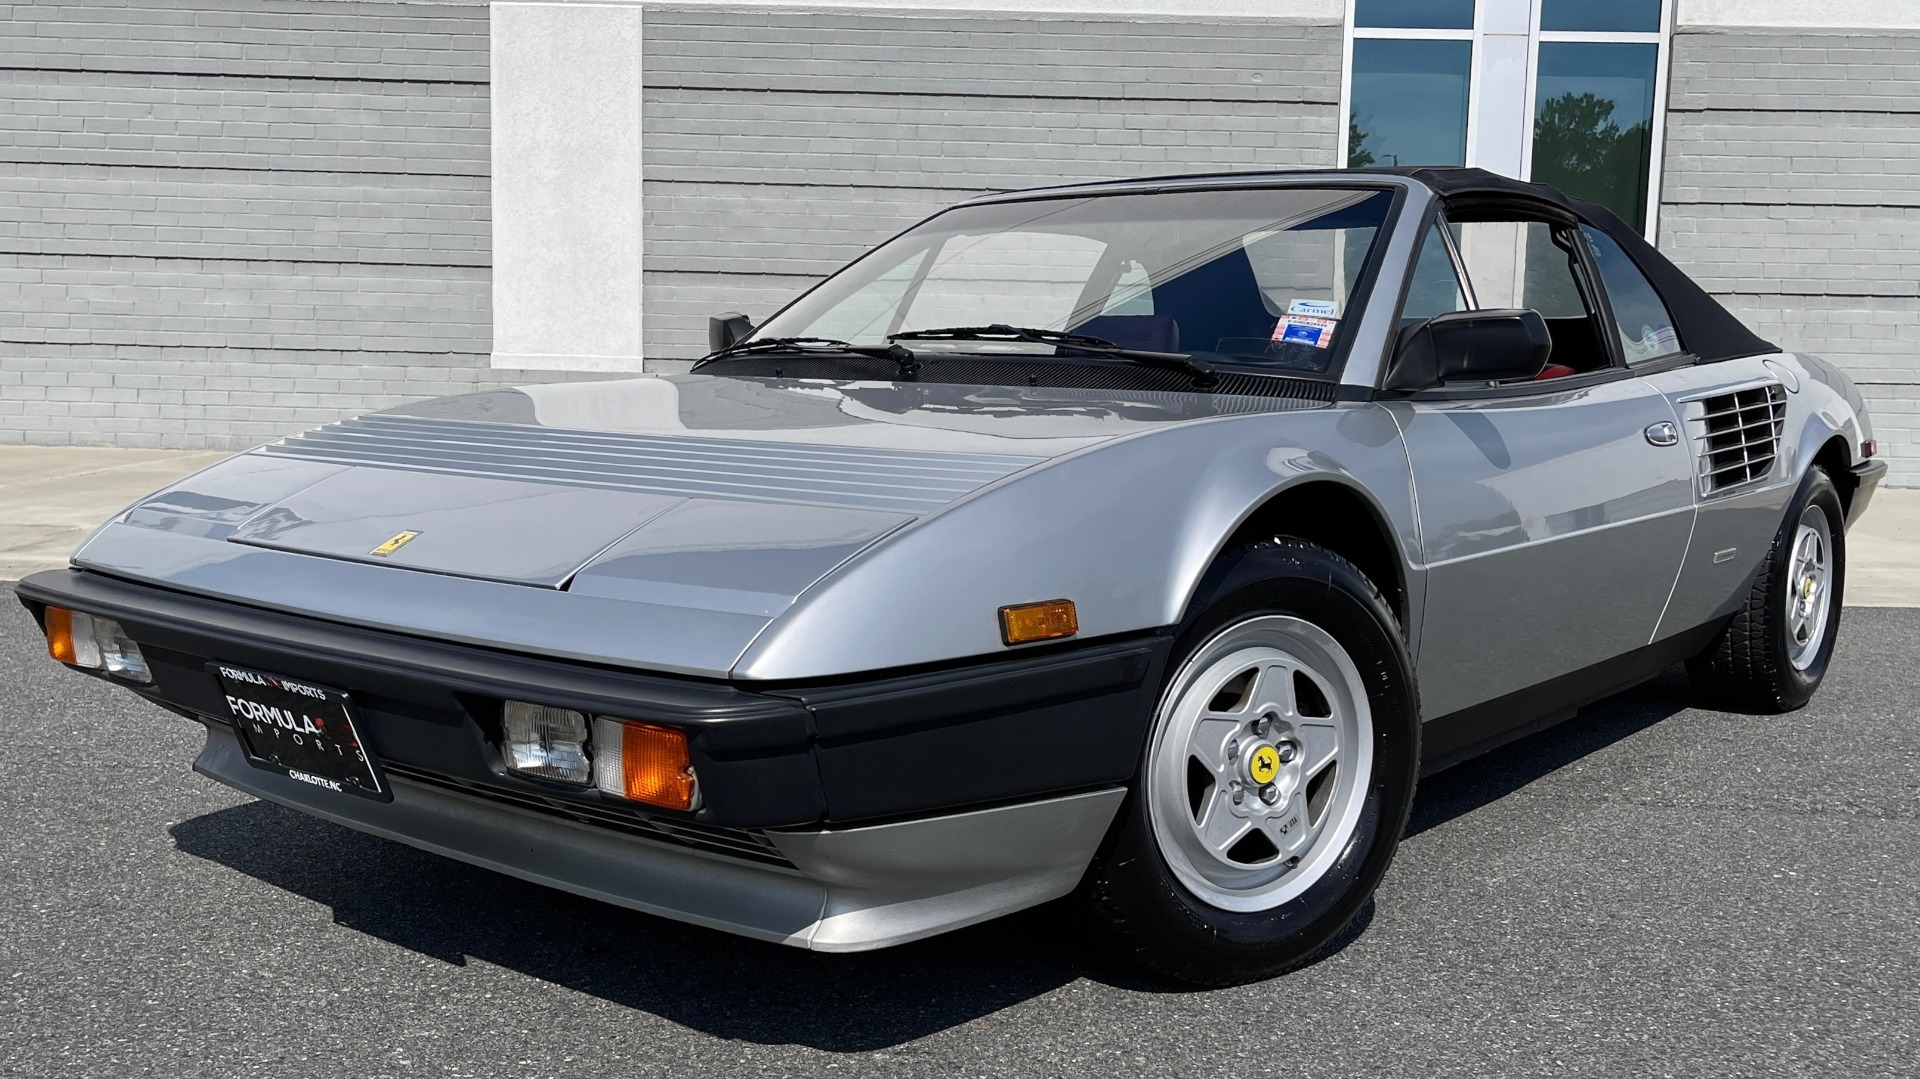 Used 1984 Ferrari MONDIAL 2+2 CABRIOLET / MID-ENGINE 3.0L V8 240HP / 5-SPEED MANUAL / LOW MILES for sale Sold at Formula Imports in Charlotte NC 28227 1